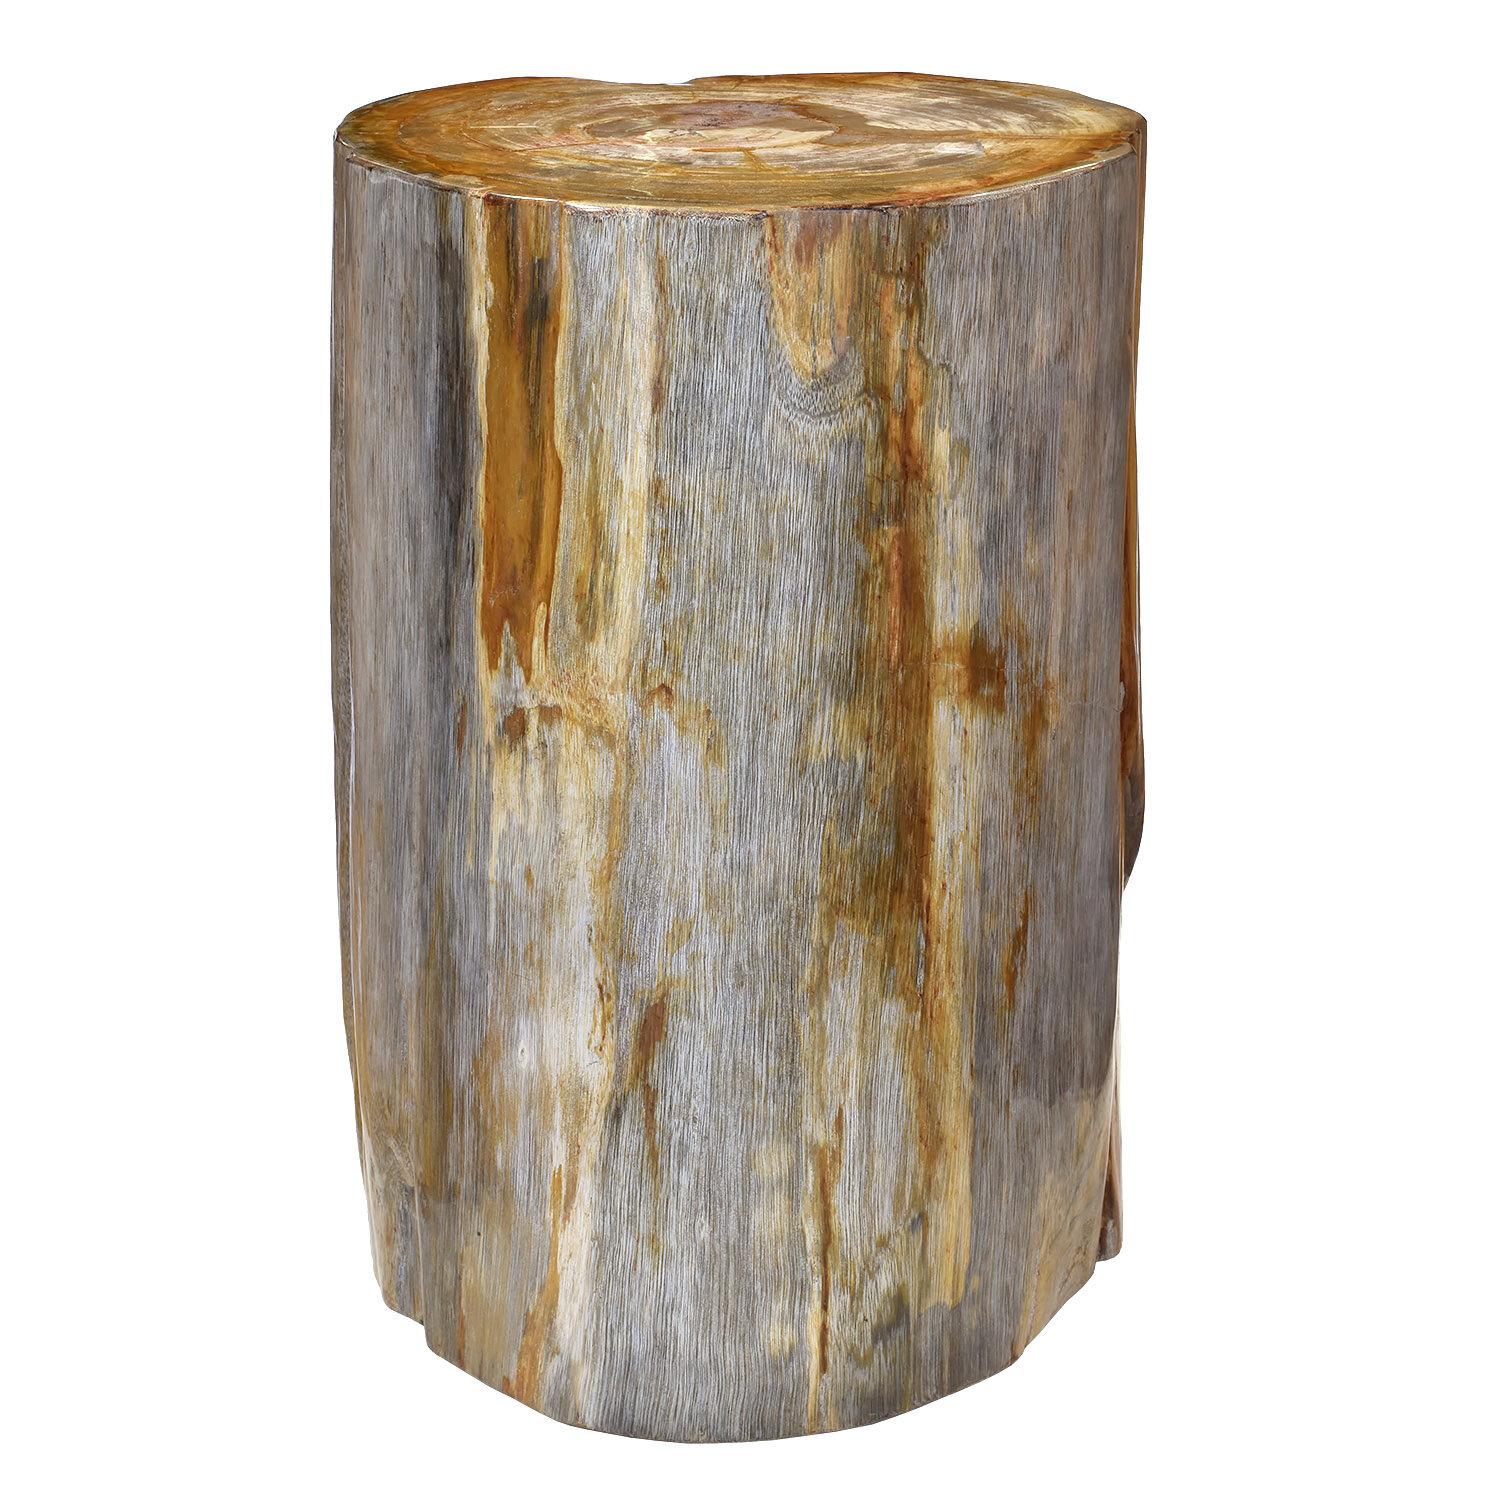 Petrified wood (millions of years old) stool or low pedestal from Indonesia

Weight: 175 lbs. / 79 kg 

Petrified wood is a fossilized organic representation of the original vegetation. 

Minerals present during the crystallization process